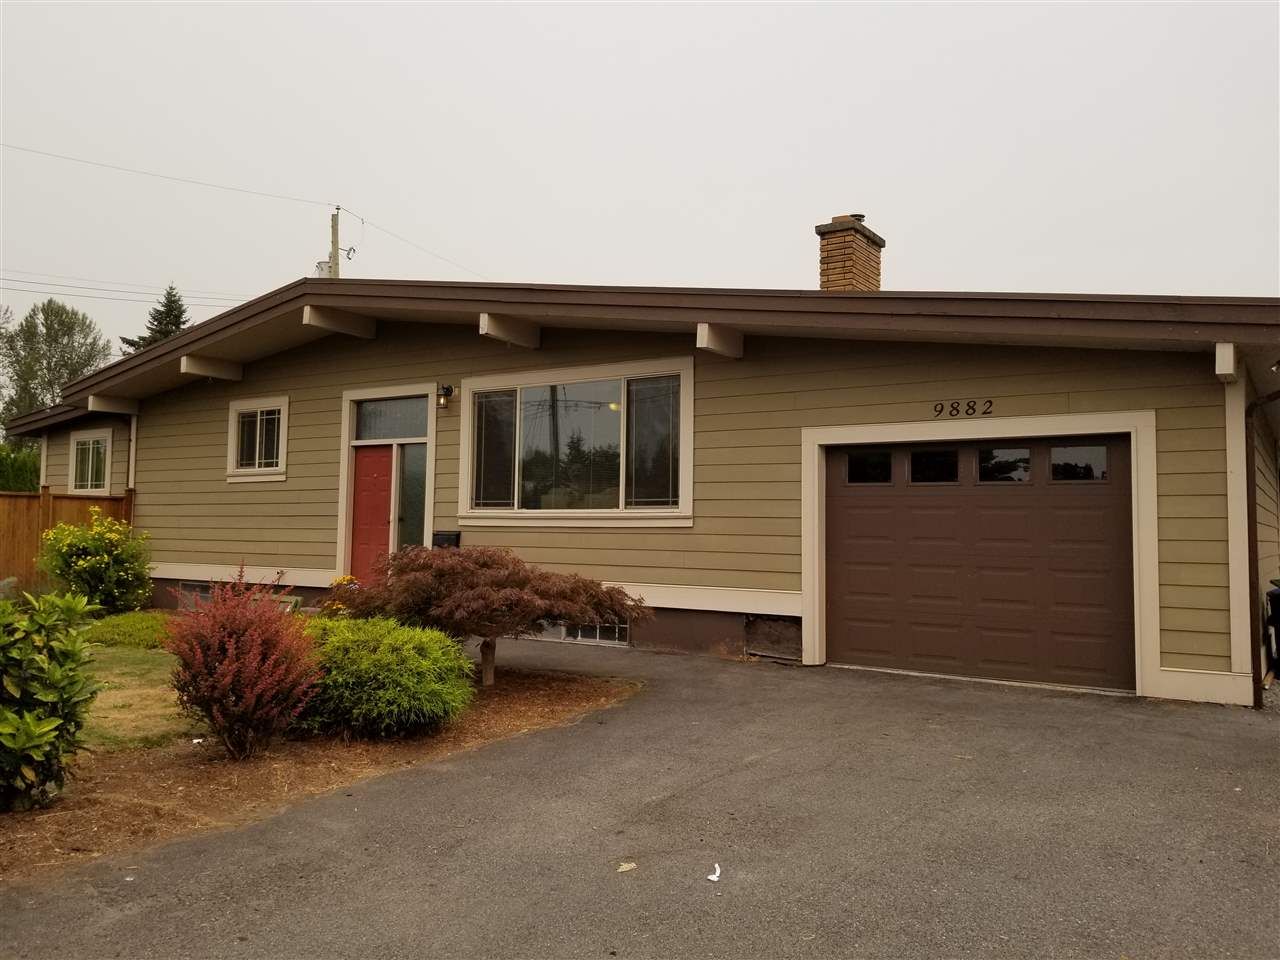 Main Photo: 9882 MENZIES Street in Chilliwack: Chilliwack N Yale-Well House for sale : MLS®# R2328969